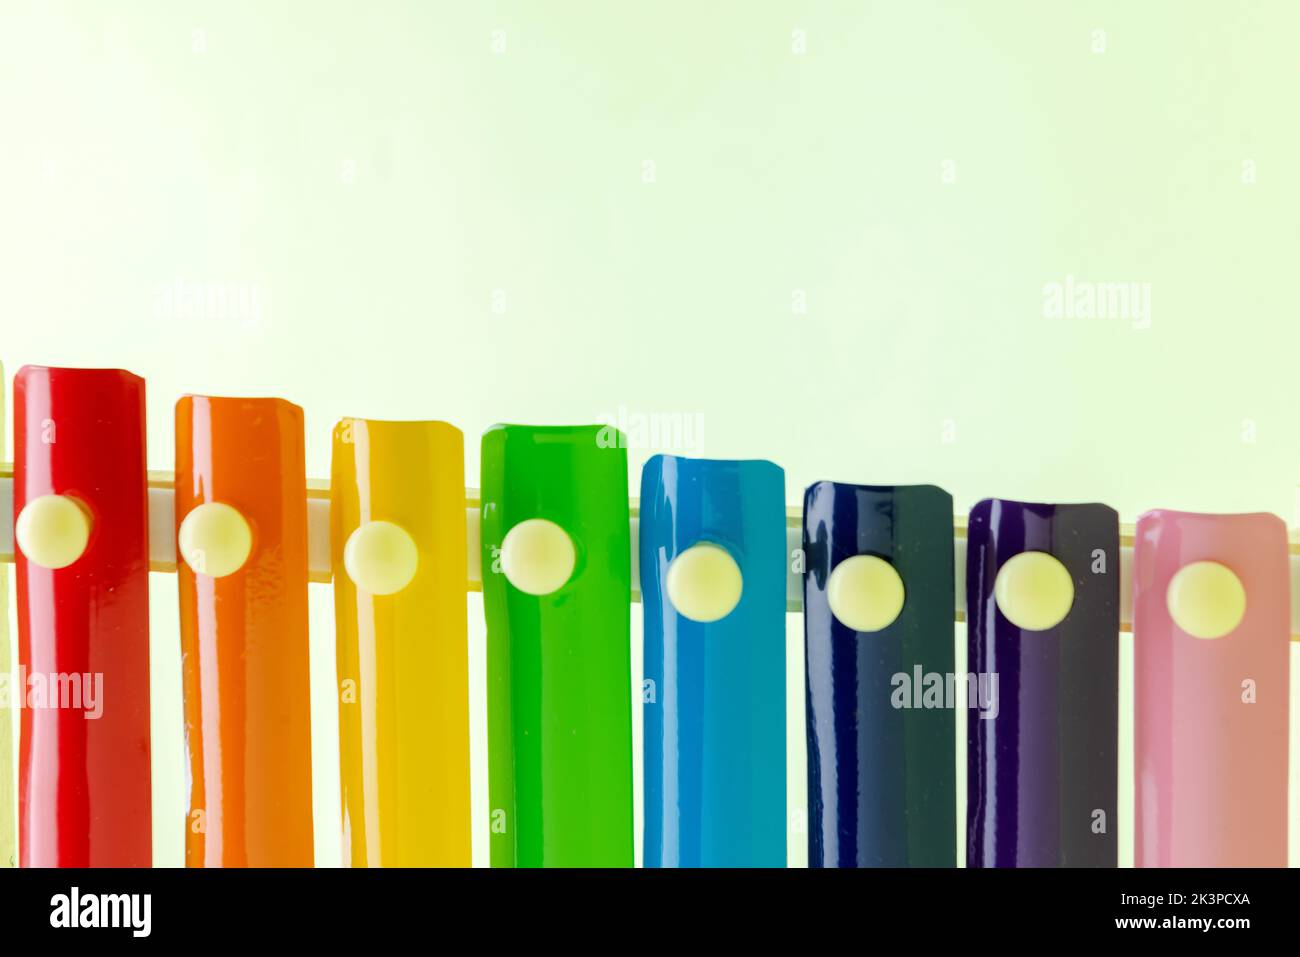 Colorful wooden xylophone toy on a colored background Stock Photo